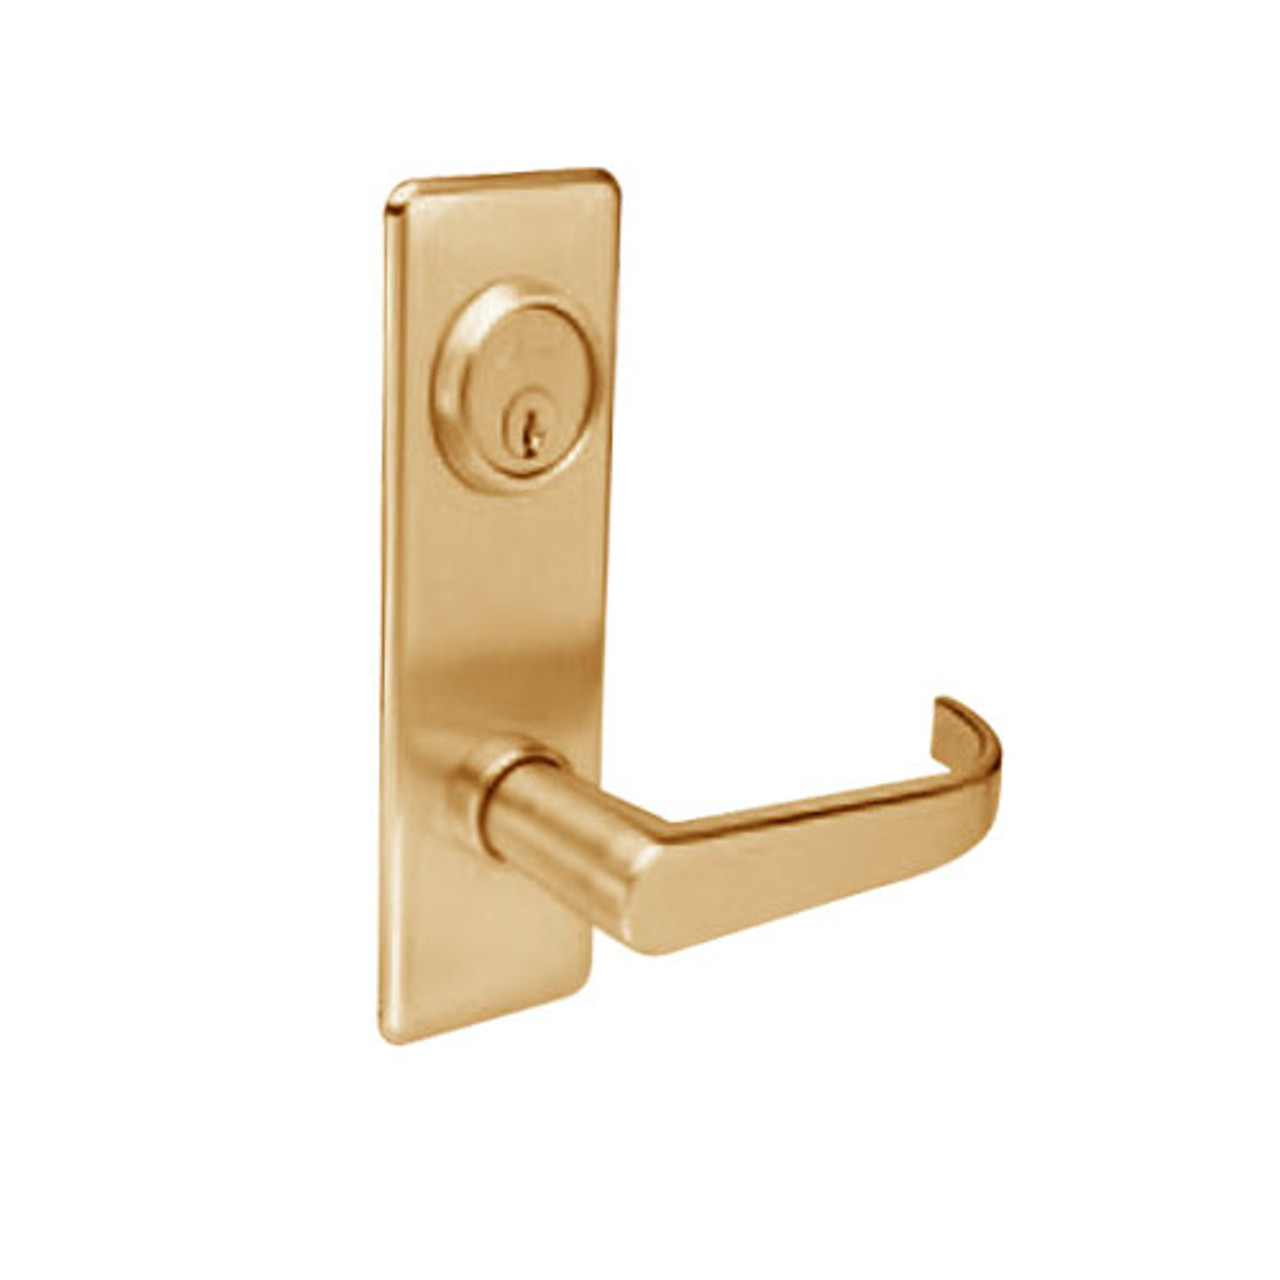 BM21-BRG-10 Arrow Mortise Lock BM Series Entrance Lever with Broadway Design and G Escutcheon in Satin Bronze